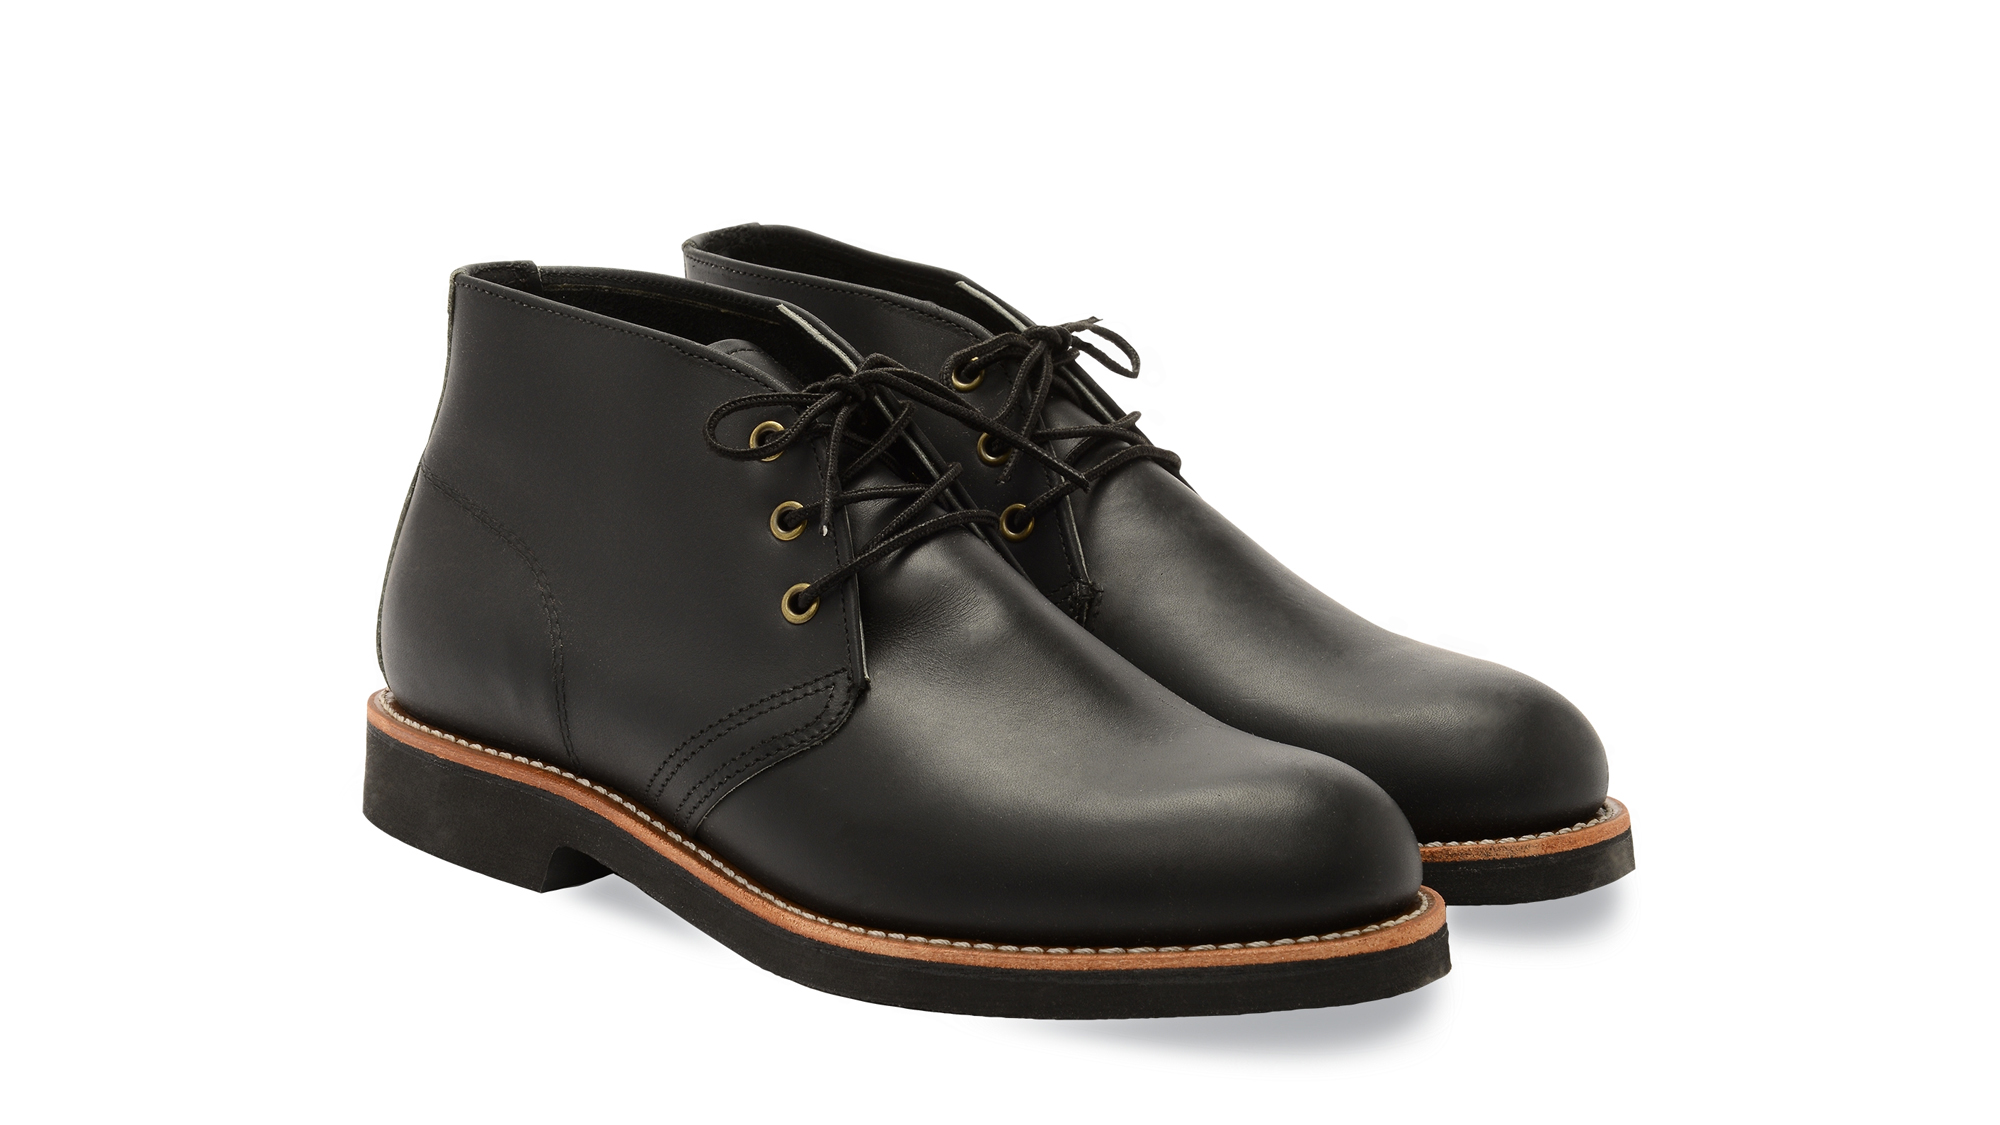 Shop the Foreman Chukka 9216 | Official Red Wing Shoes Online Store